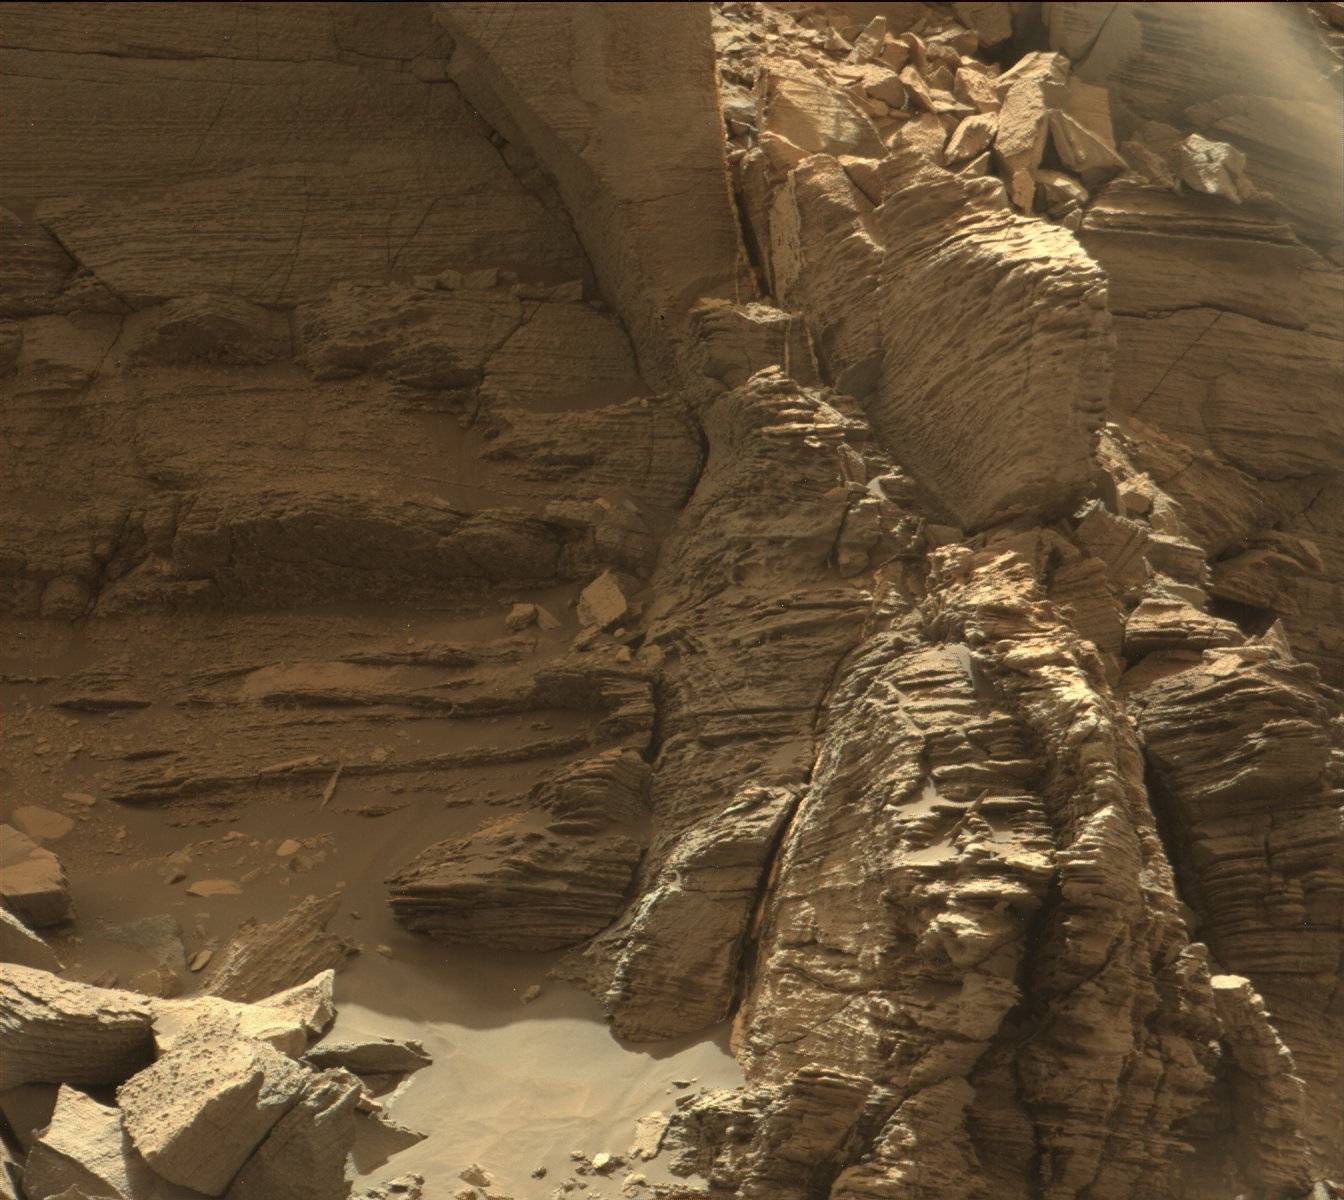 Curiosity got close to this outcrop on Sept. 9, 2016, which displays finely layered rocks.